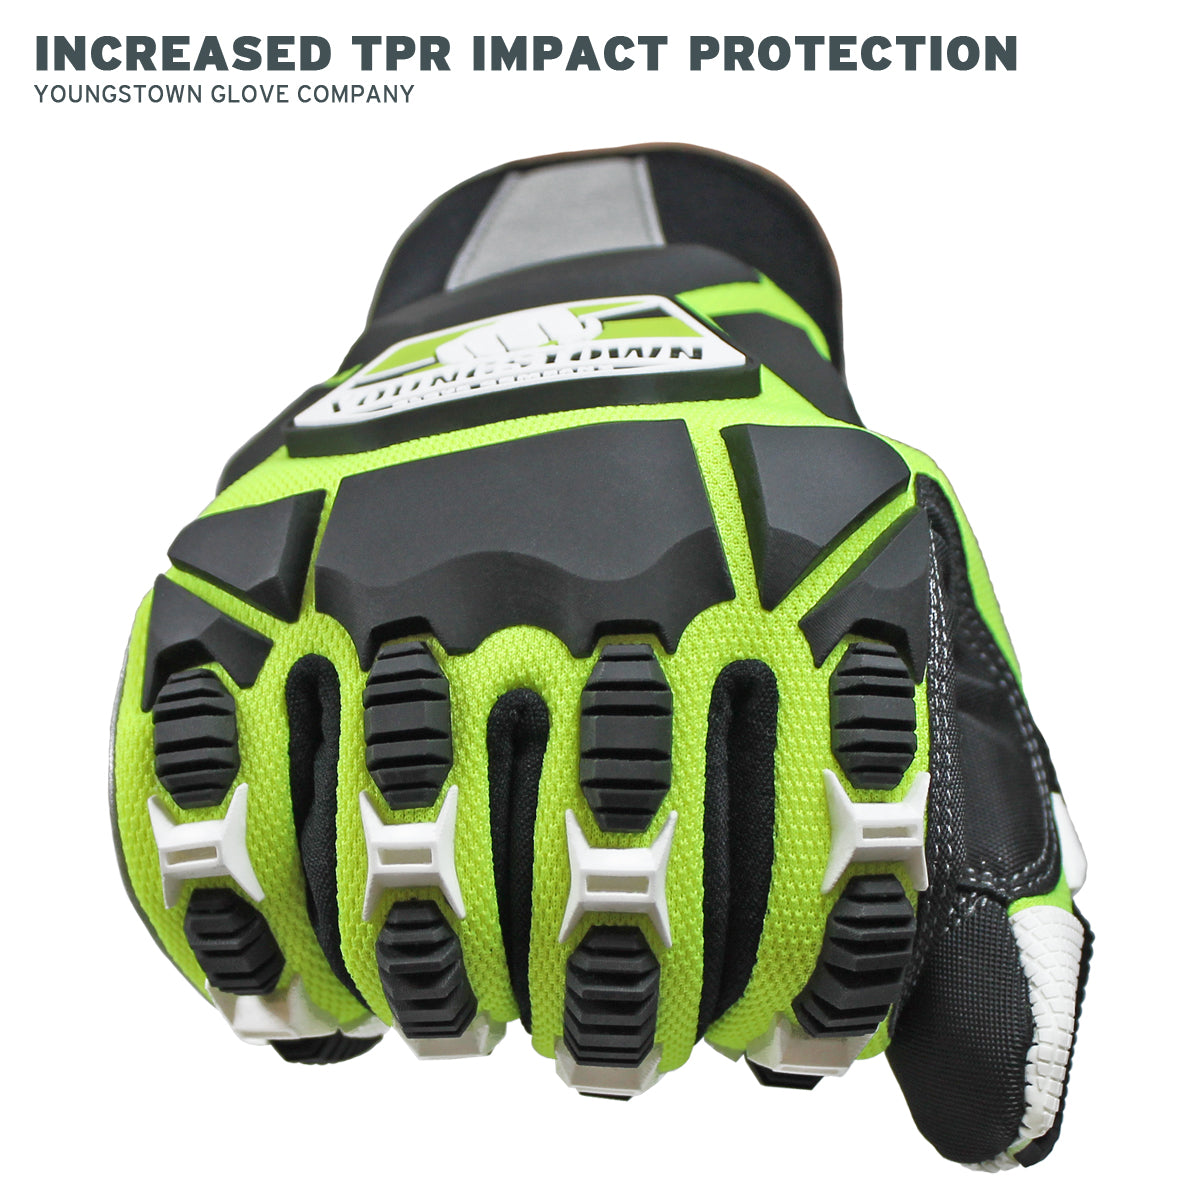 Powerful Grip TPR Impact Resistant Gloves For Oil & Gas Industry